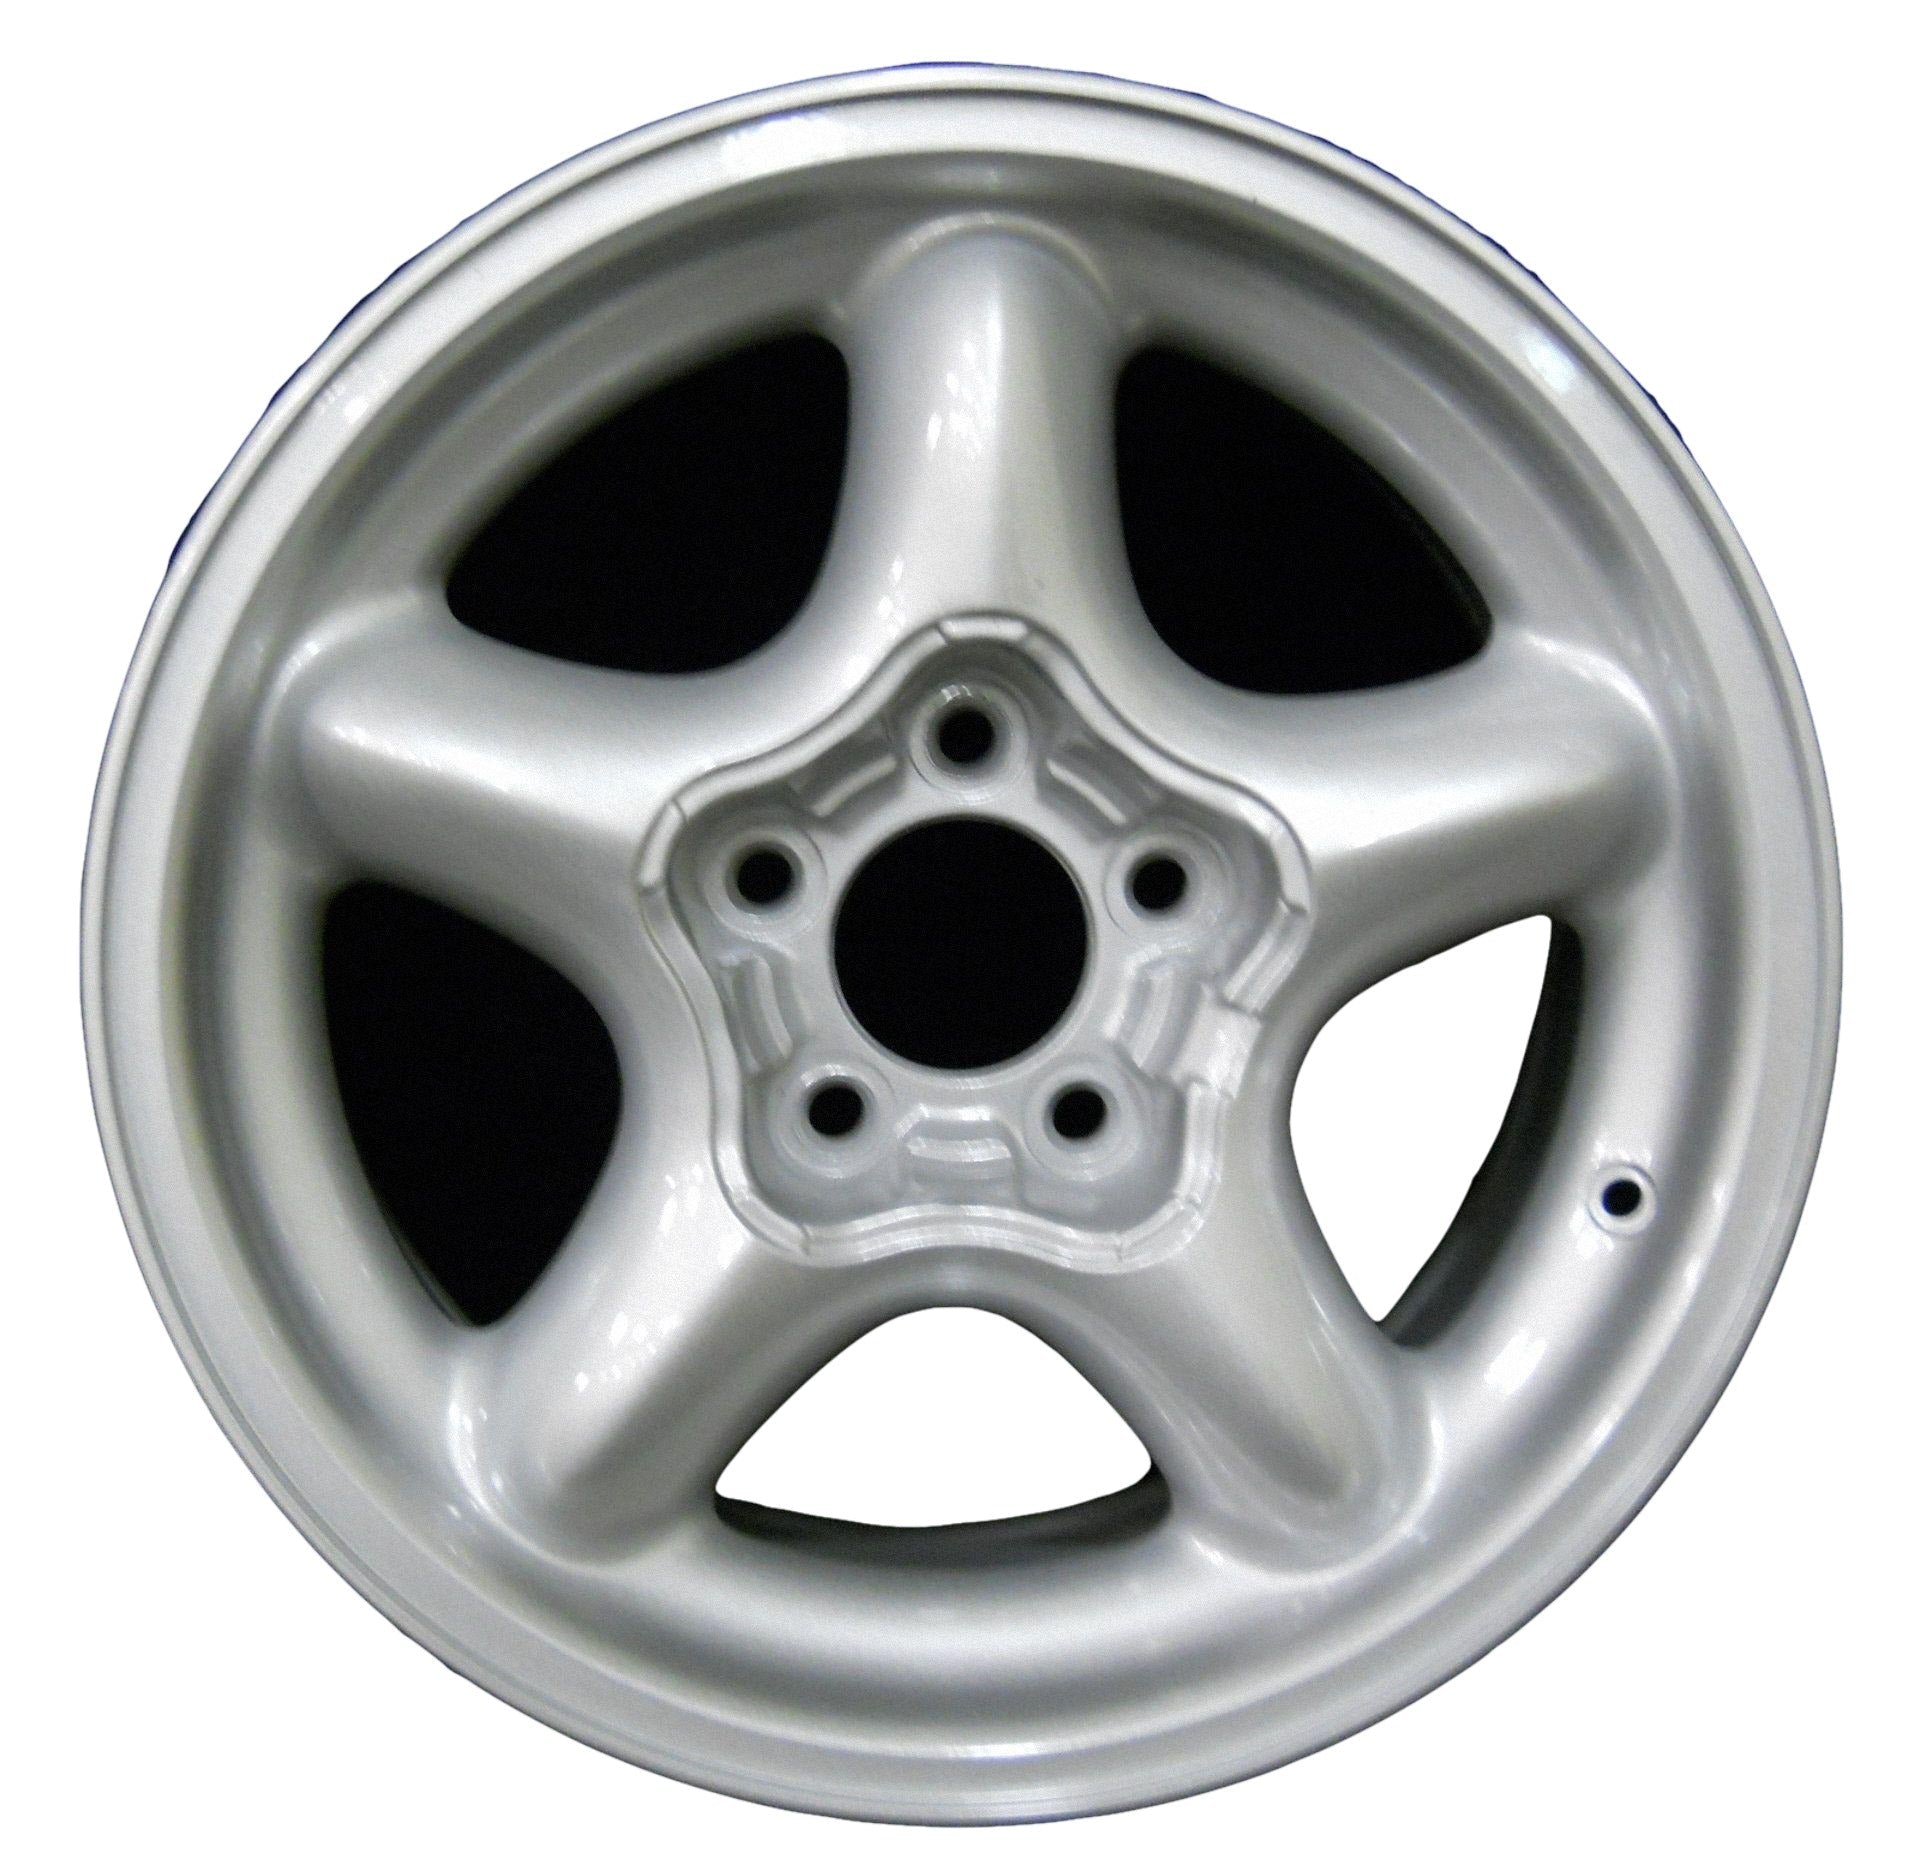 Ford Mustang  1994, 1995, 1996, 1997, 1998 Factory OEM Car Wheel Size 16x7.5 Alloy WAO.3088.PS02.FF